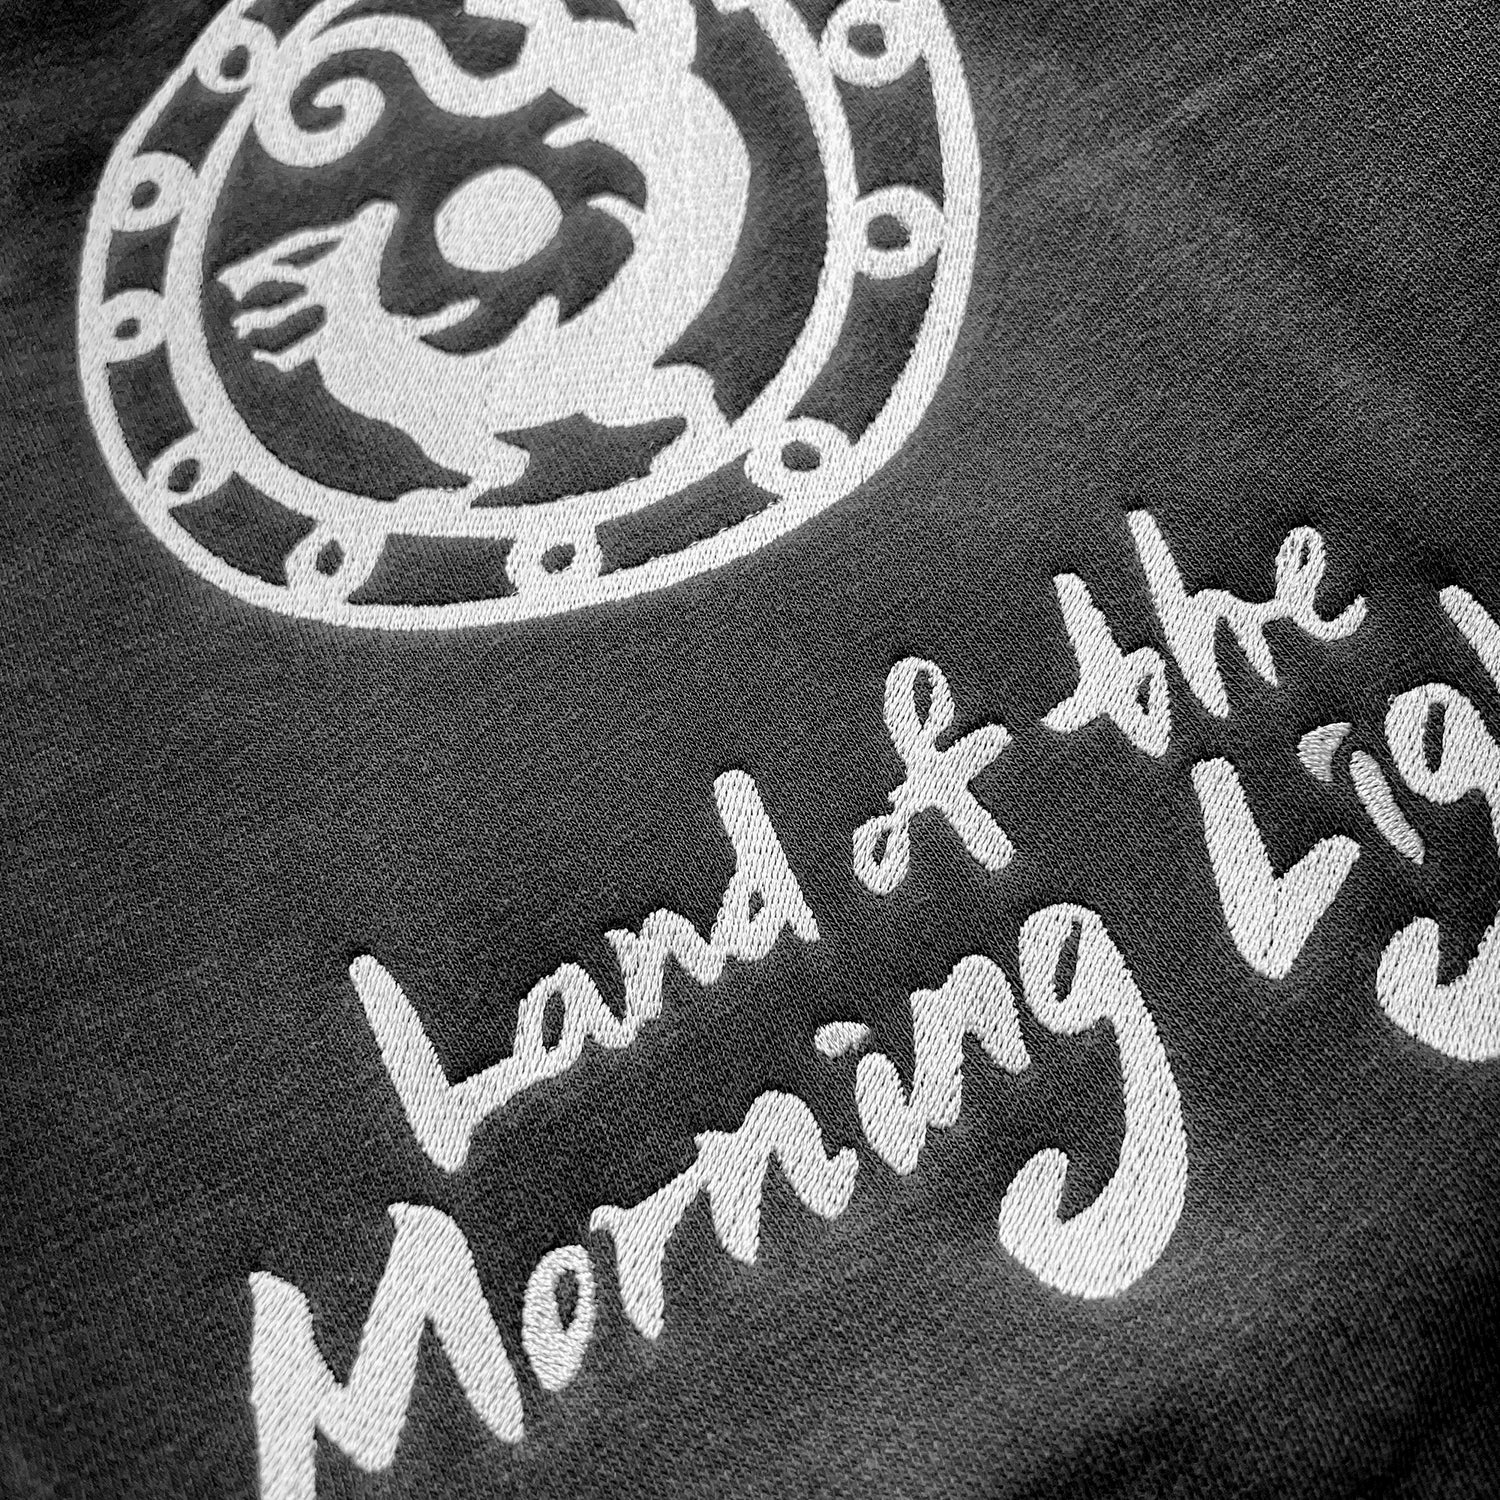 Land of the Morning Light Hoodie